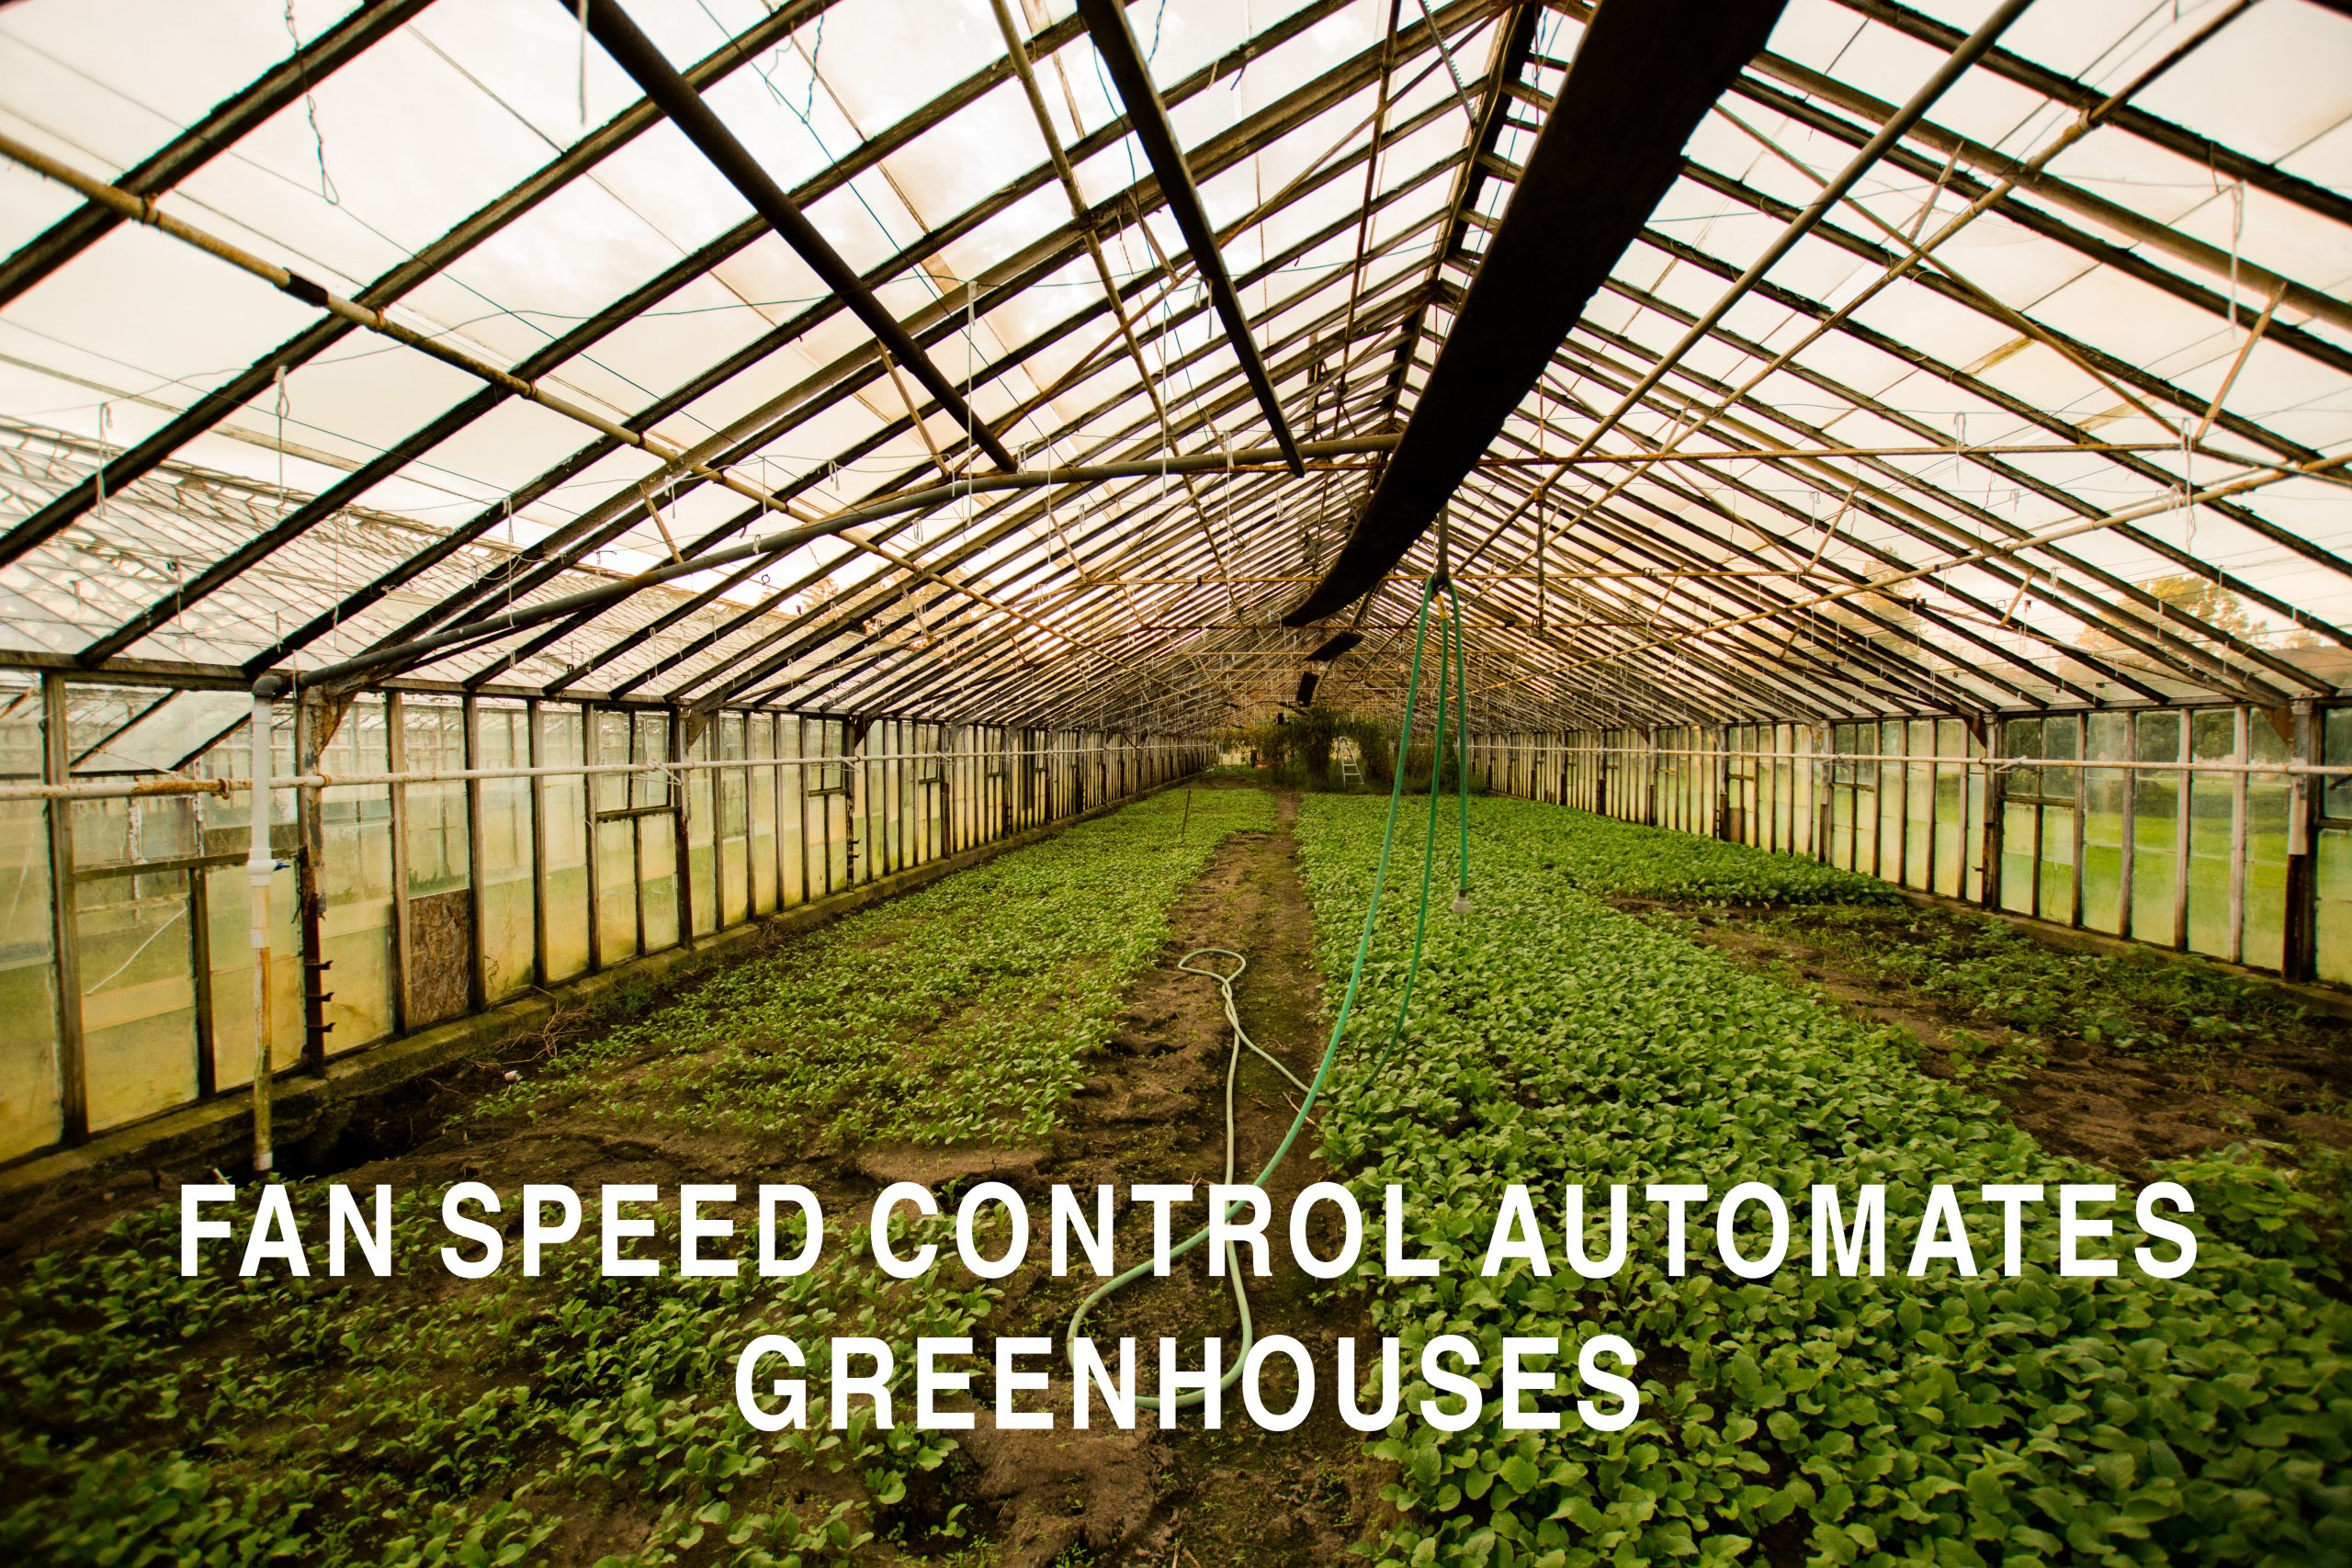 Fan Speed Control Automates Greenhouses